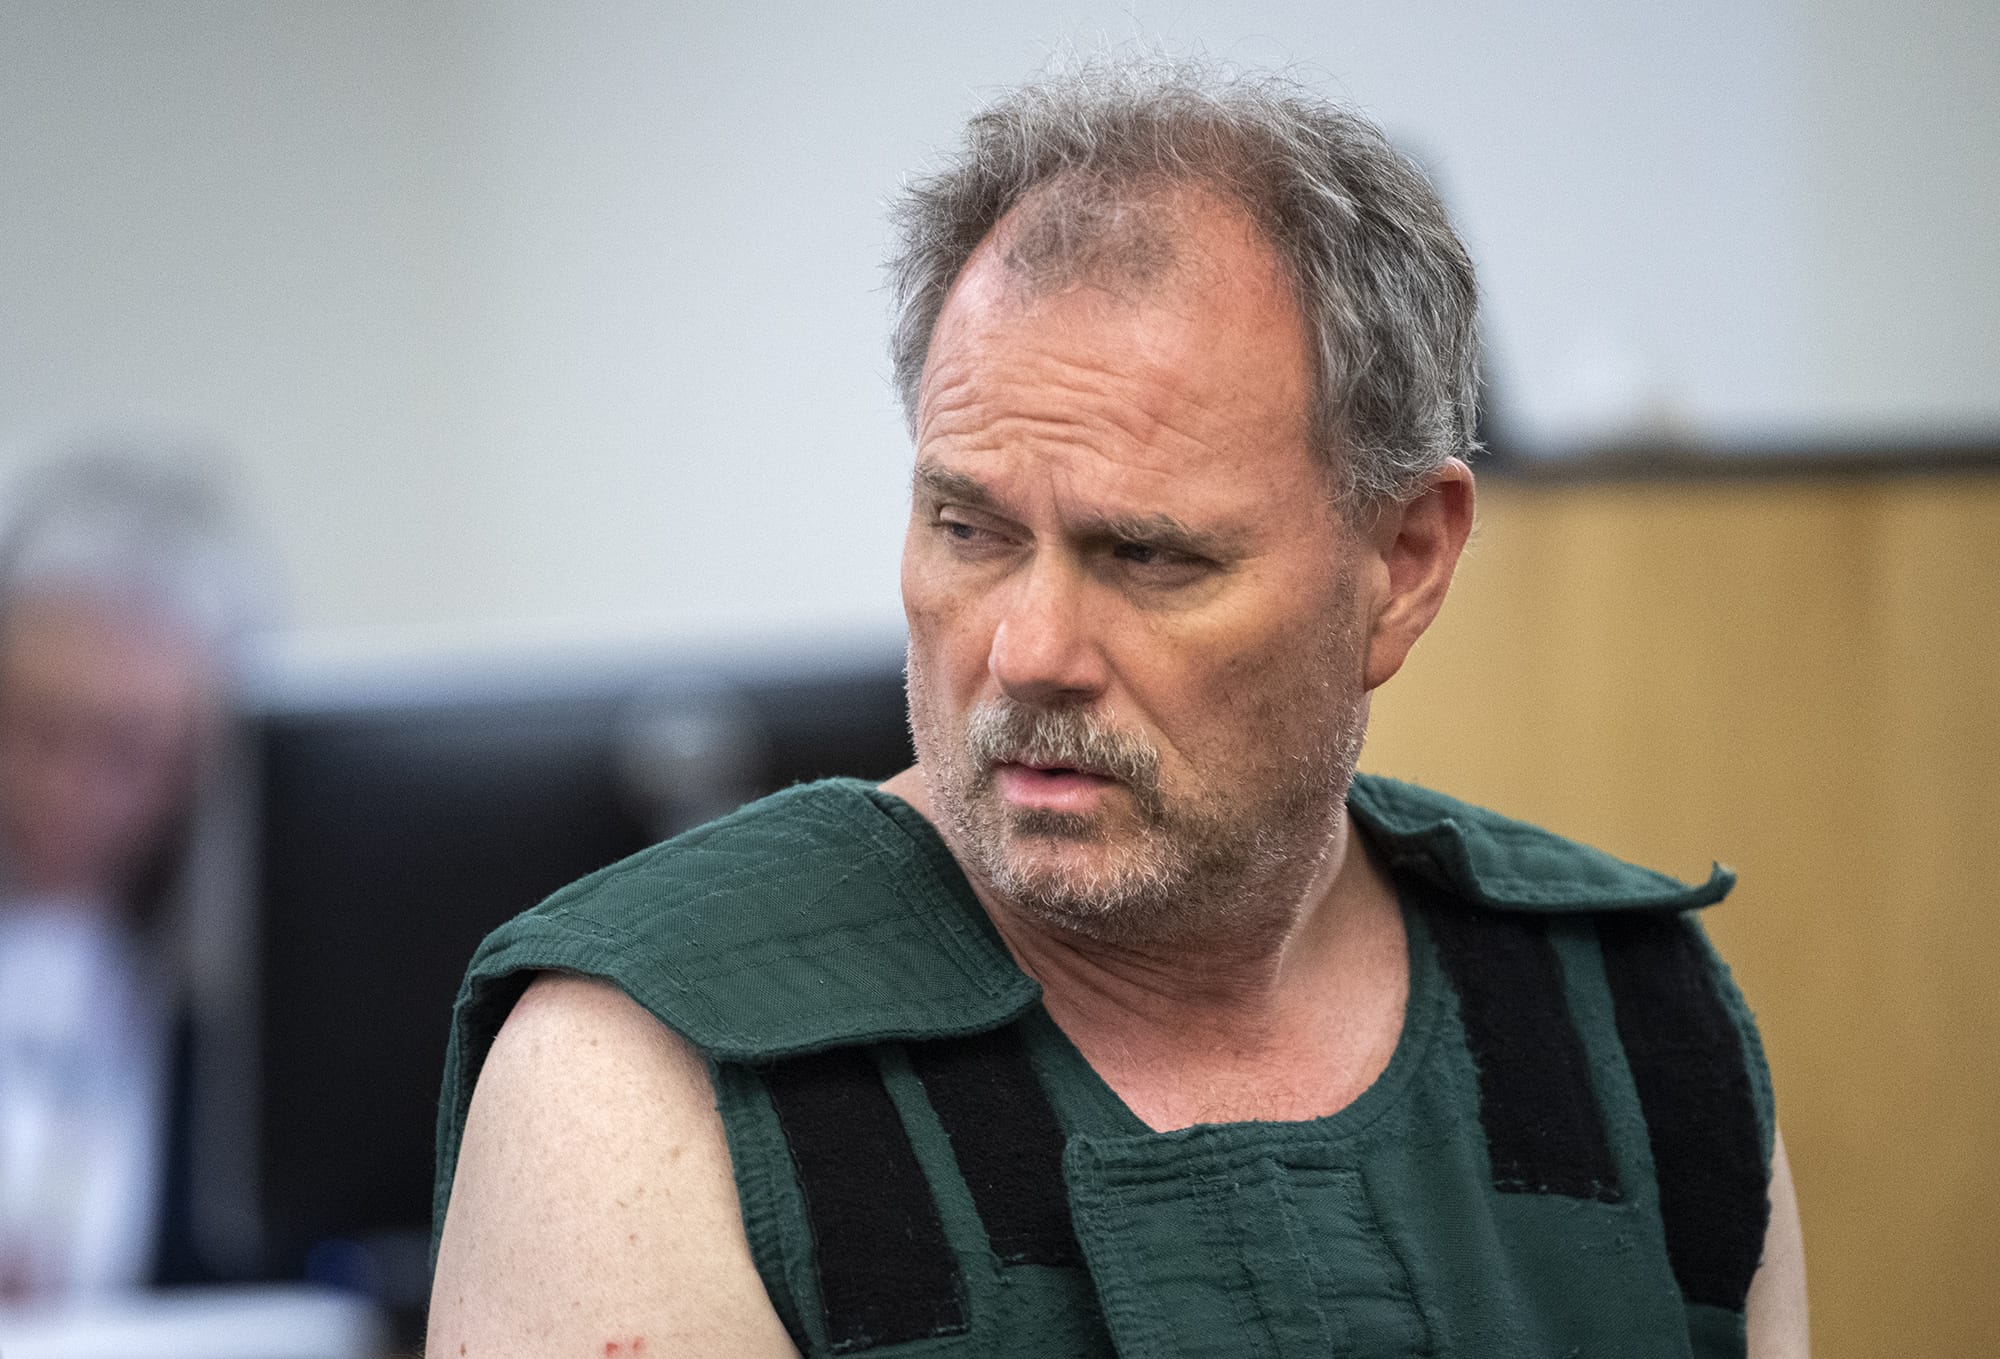 Robert W. Burdick, 56, appears in Clark County Superior Court, facing an allegation of first-degree murder on Wednesday, June 19, 2019. Burdick called 911 at 2:05 a.m. Tuesday from an apartment complex in the 600 block of West Lookout Ridge Drive. He said he was armed with butcher knives and was holding his wife hostage in their home, according to a Washougal Police Department news release. Linda Burdick 49, died later at PeaceHealth Southwest Medical Center in Vancouver after undergoing emergency surgery for multiple stab wounds to the upper body.